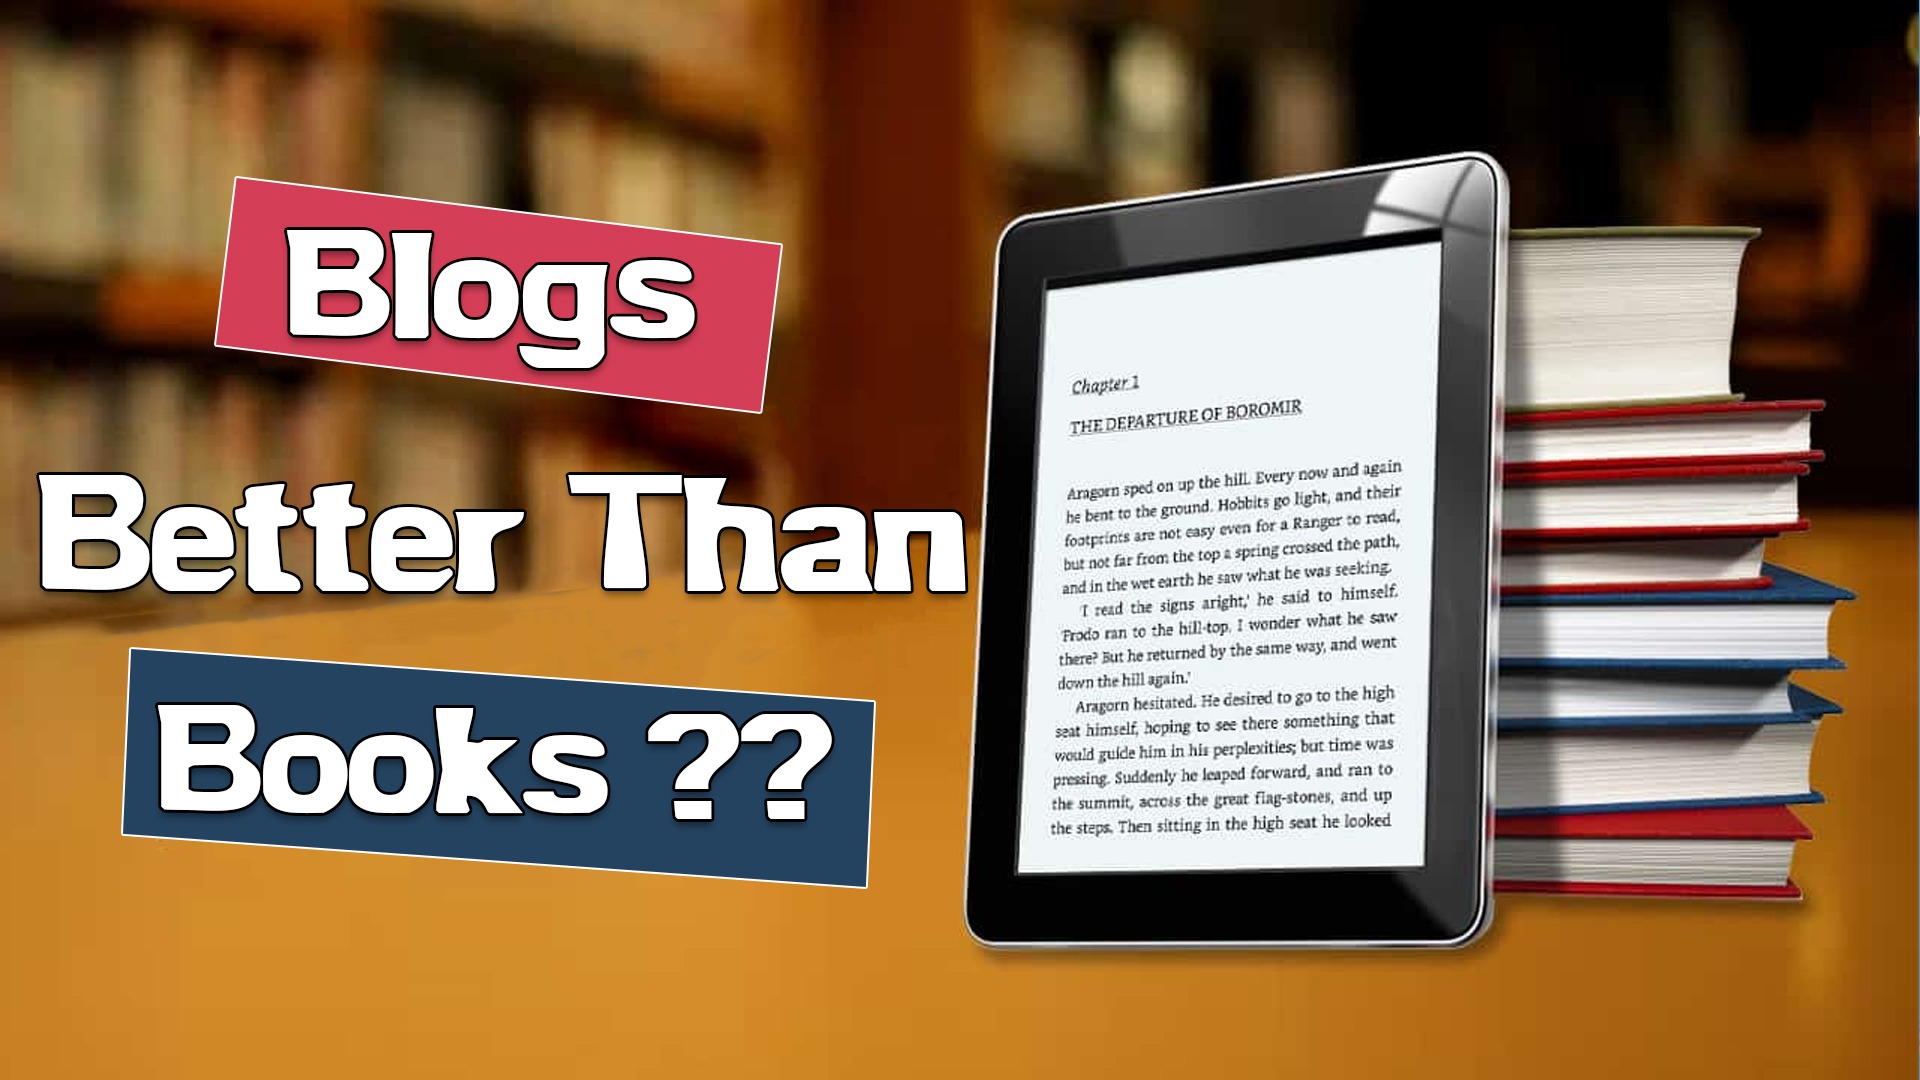 Are blogs better than books?